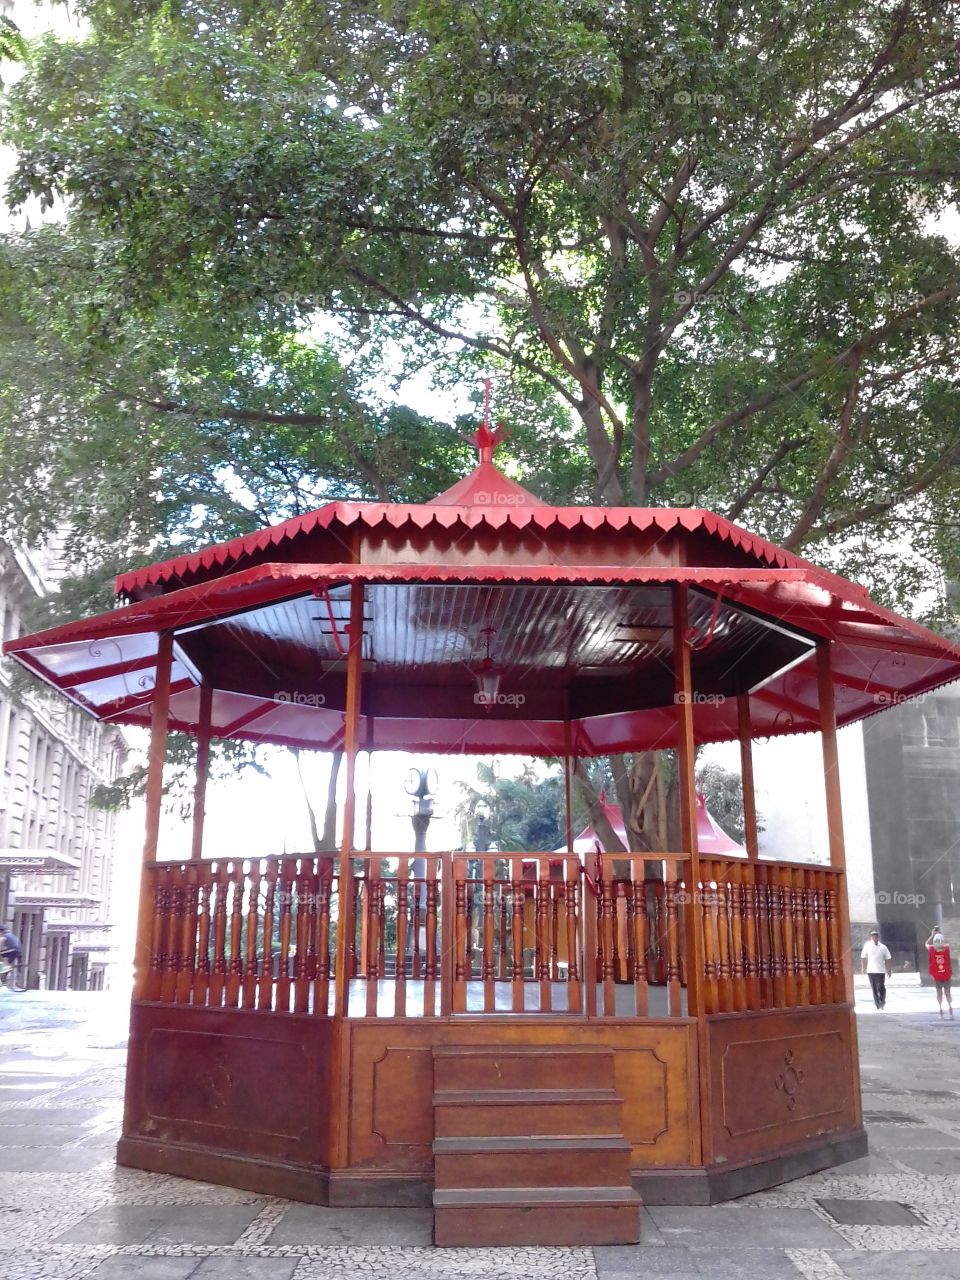 Bandstand in the old center of São Paulo